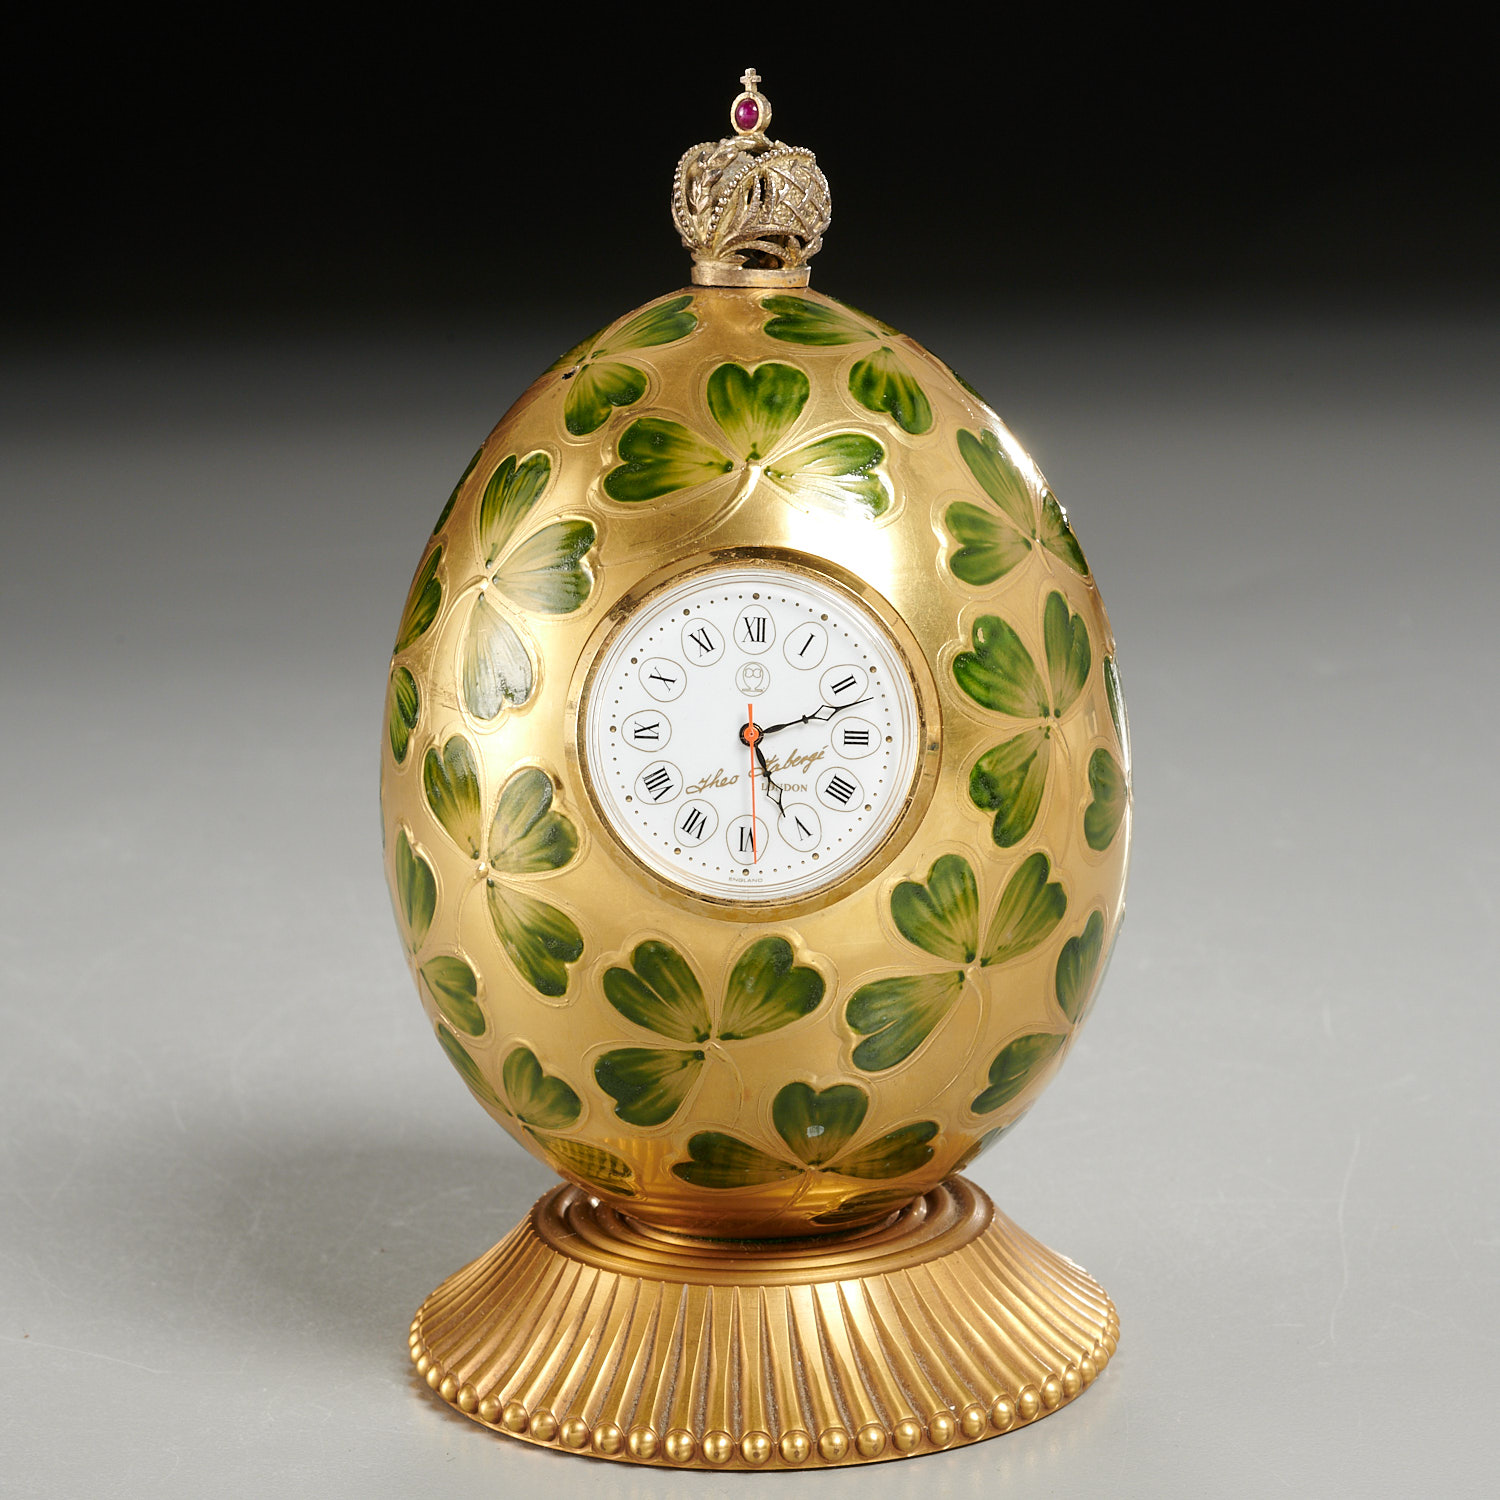 THEO FABERGE CLOVER EGG TABLE 2ce97b